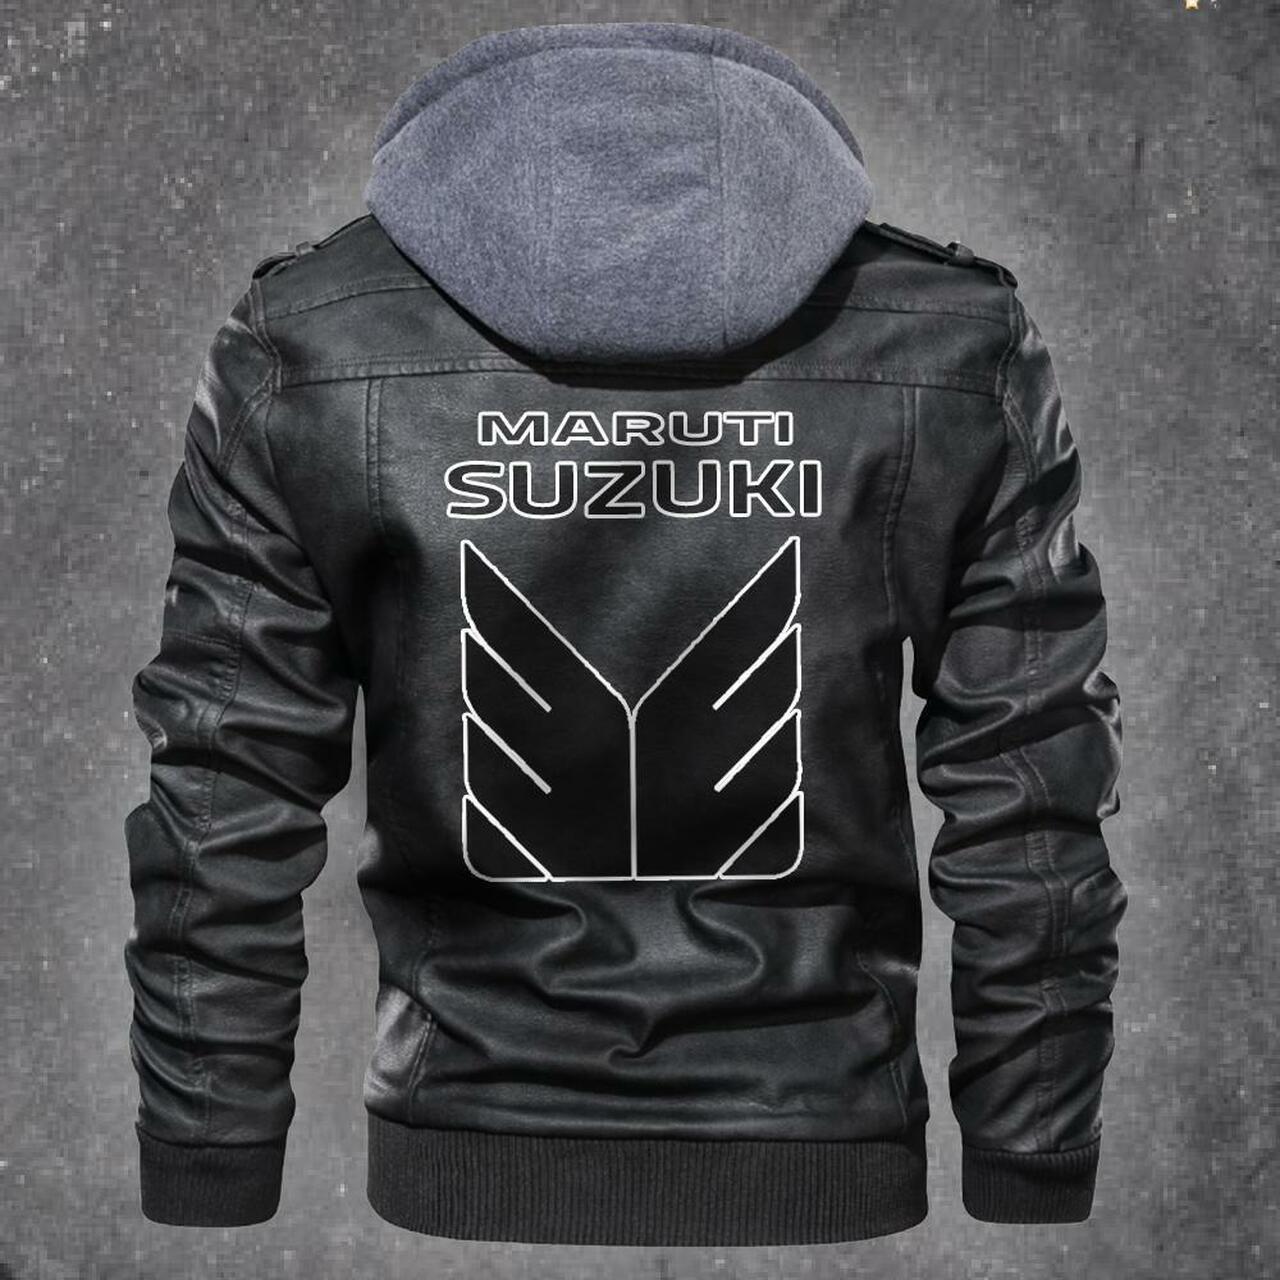 To get a great look, consider purchasing This New Leather Jacket 263